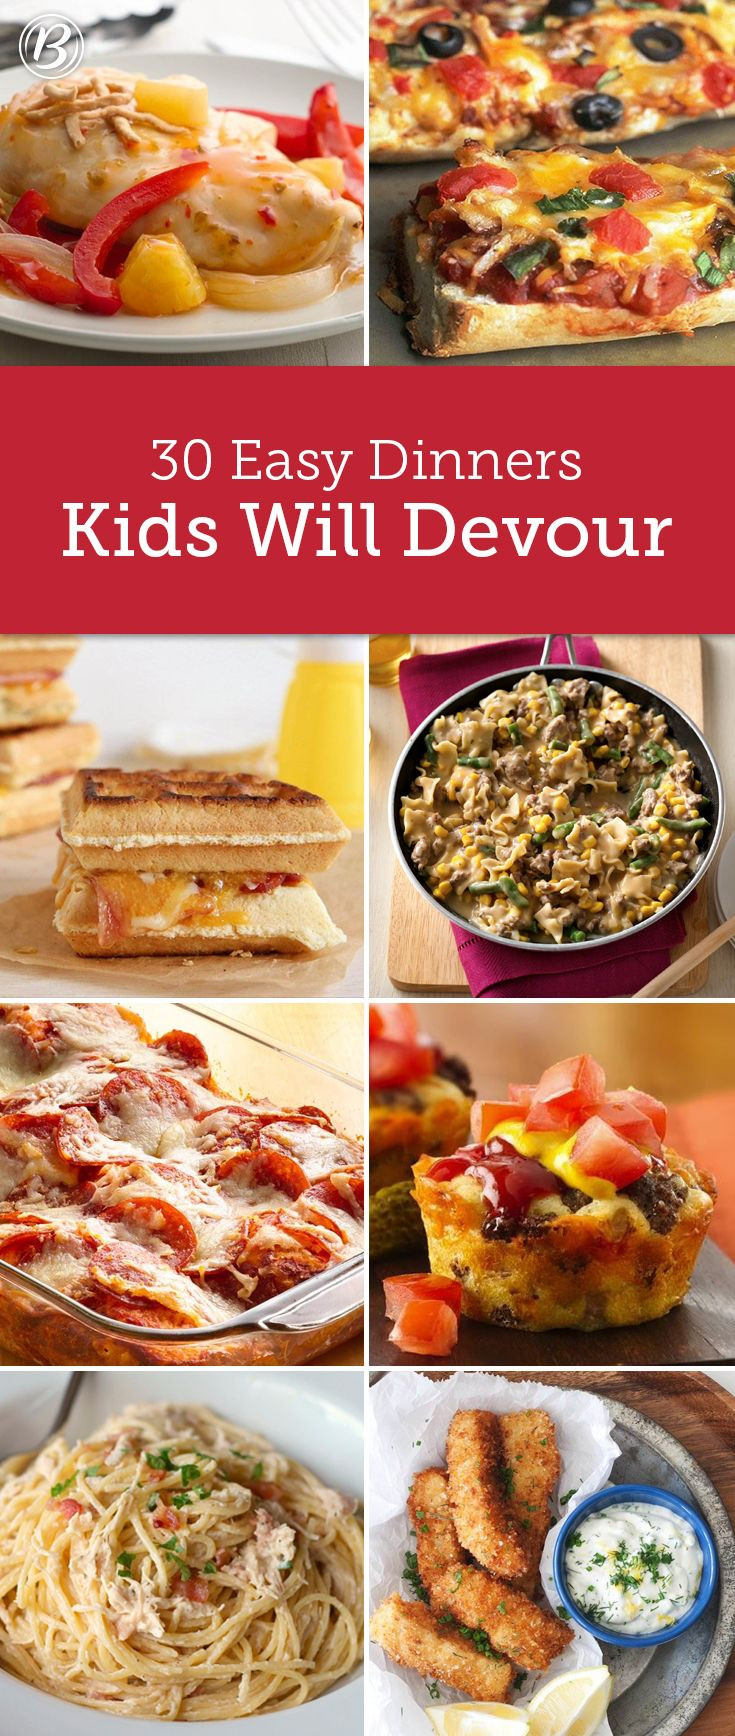 Kid Friendly Dinner Recipes
 Kids’ Most Requested Dinners Family Dinners